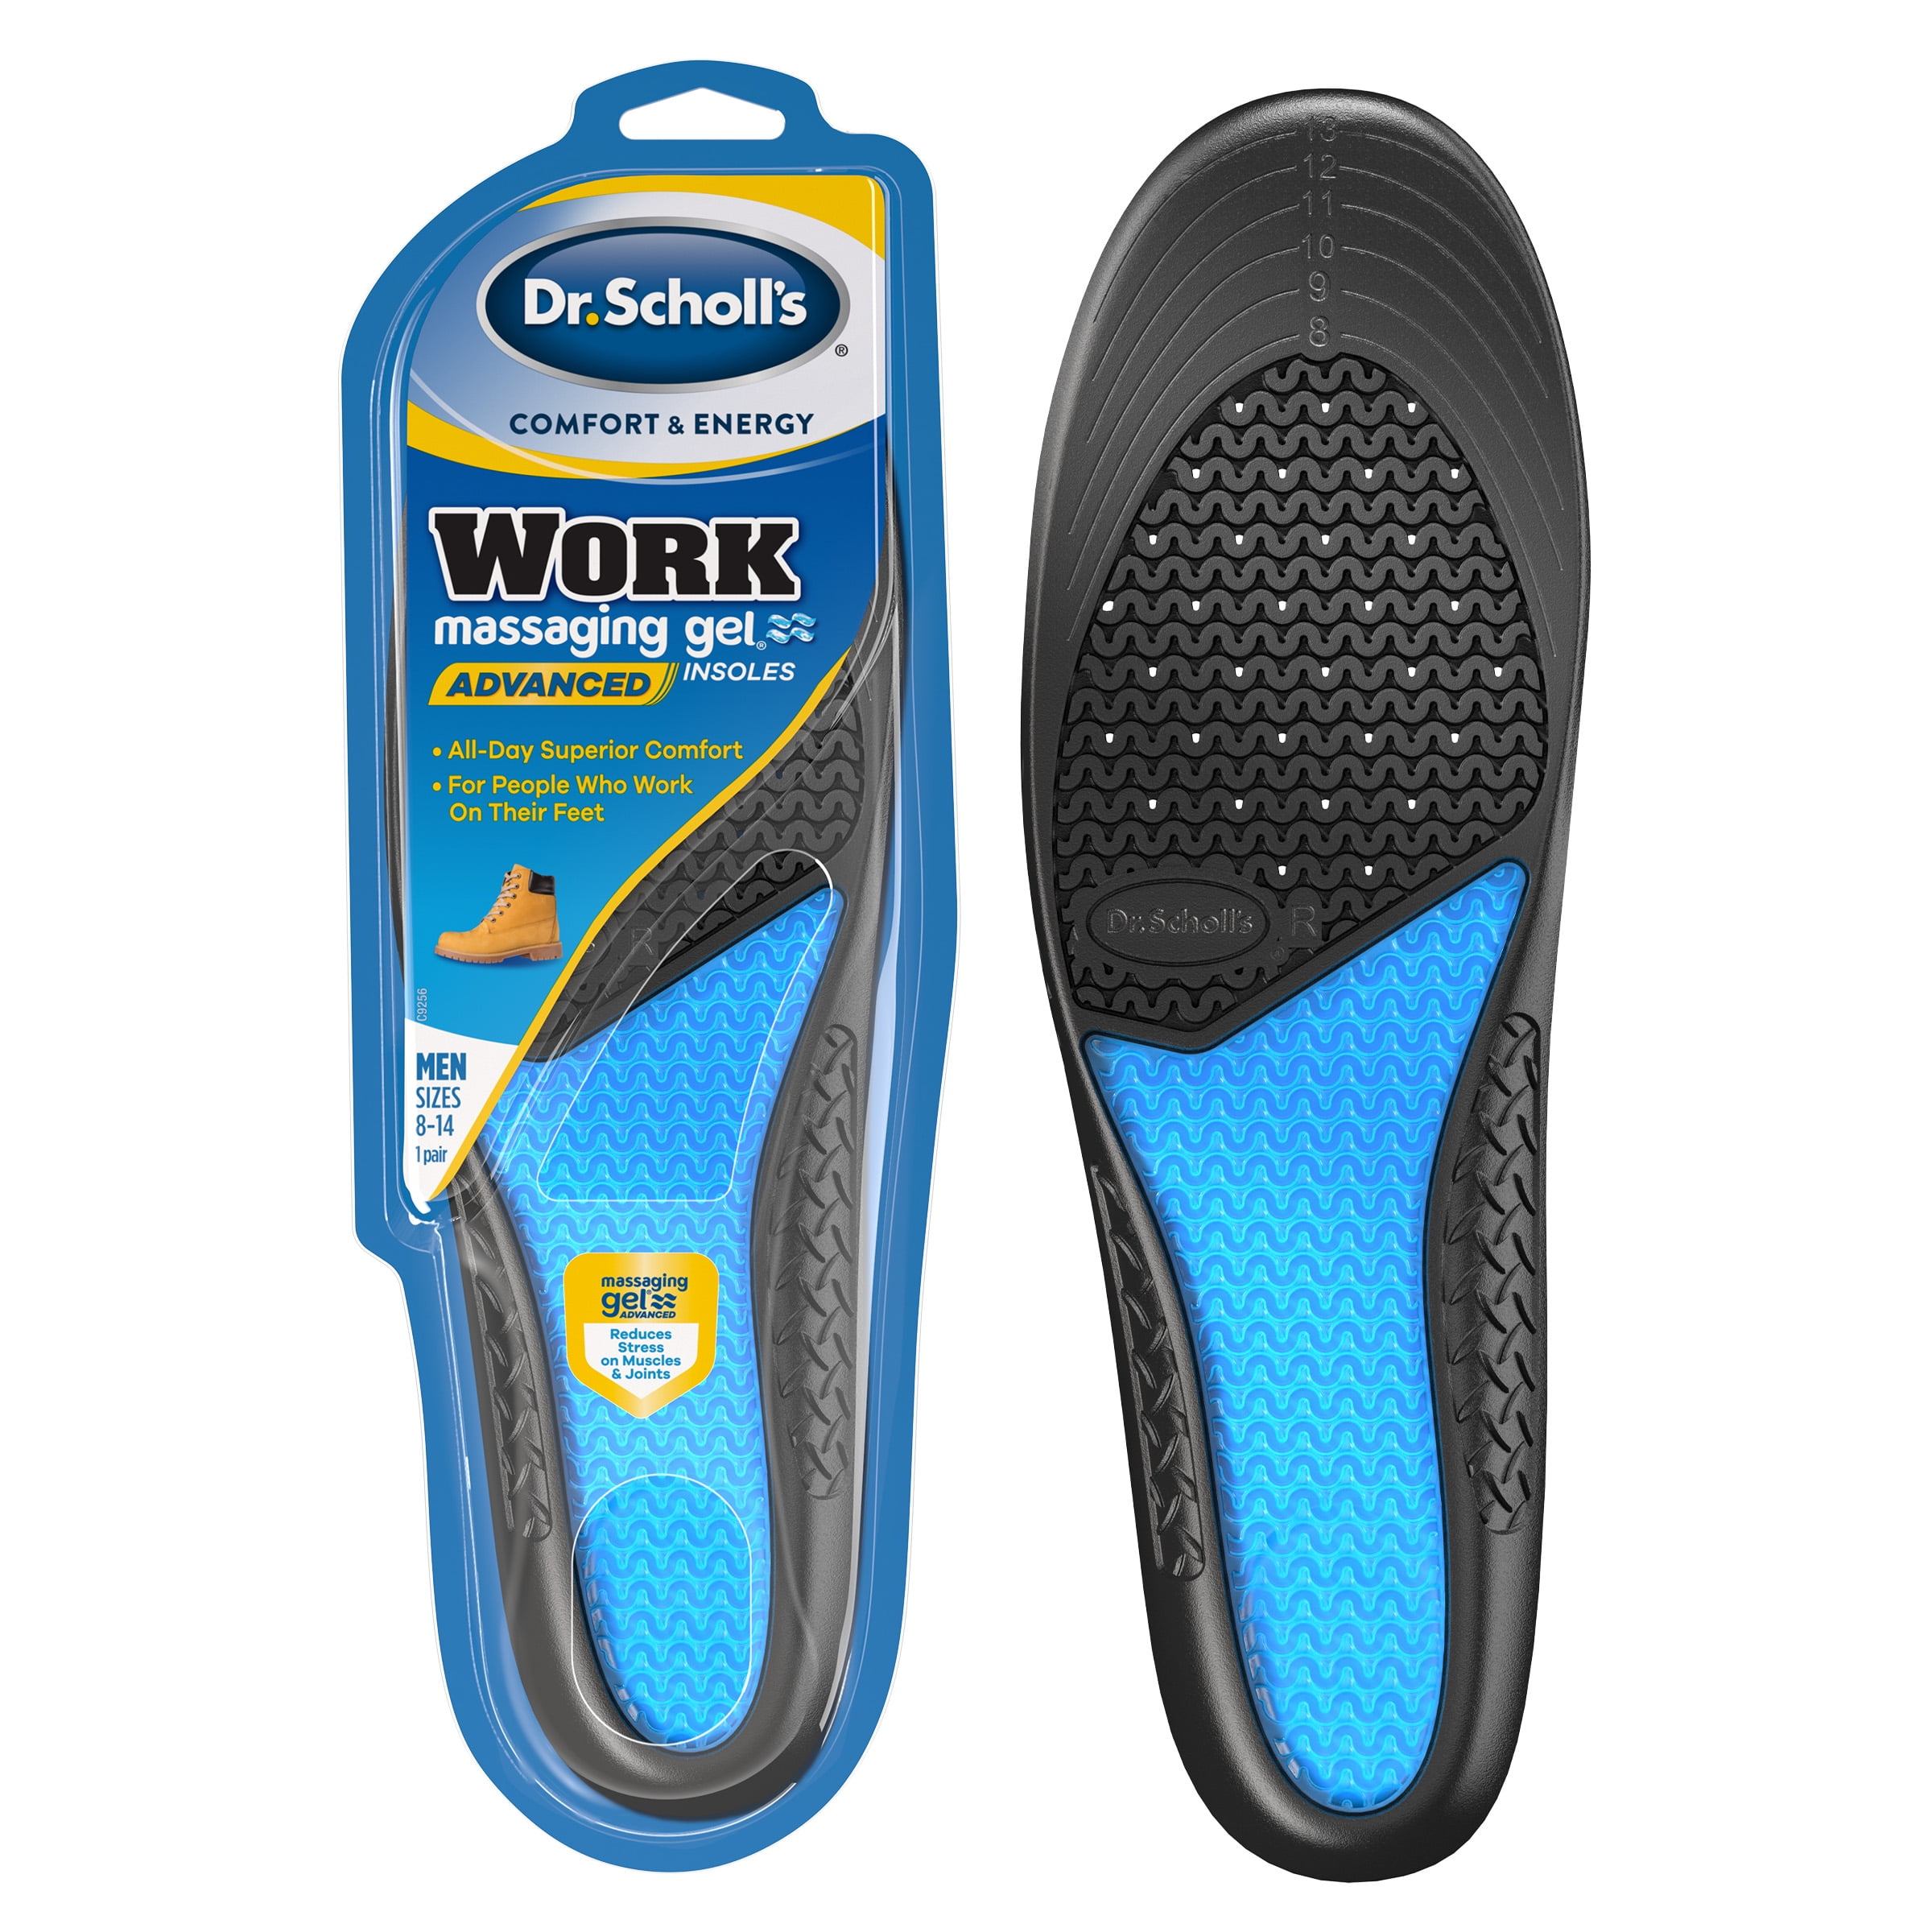 Dr. Scholl's Work All-Day Superior Comfort Insoles (with